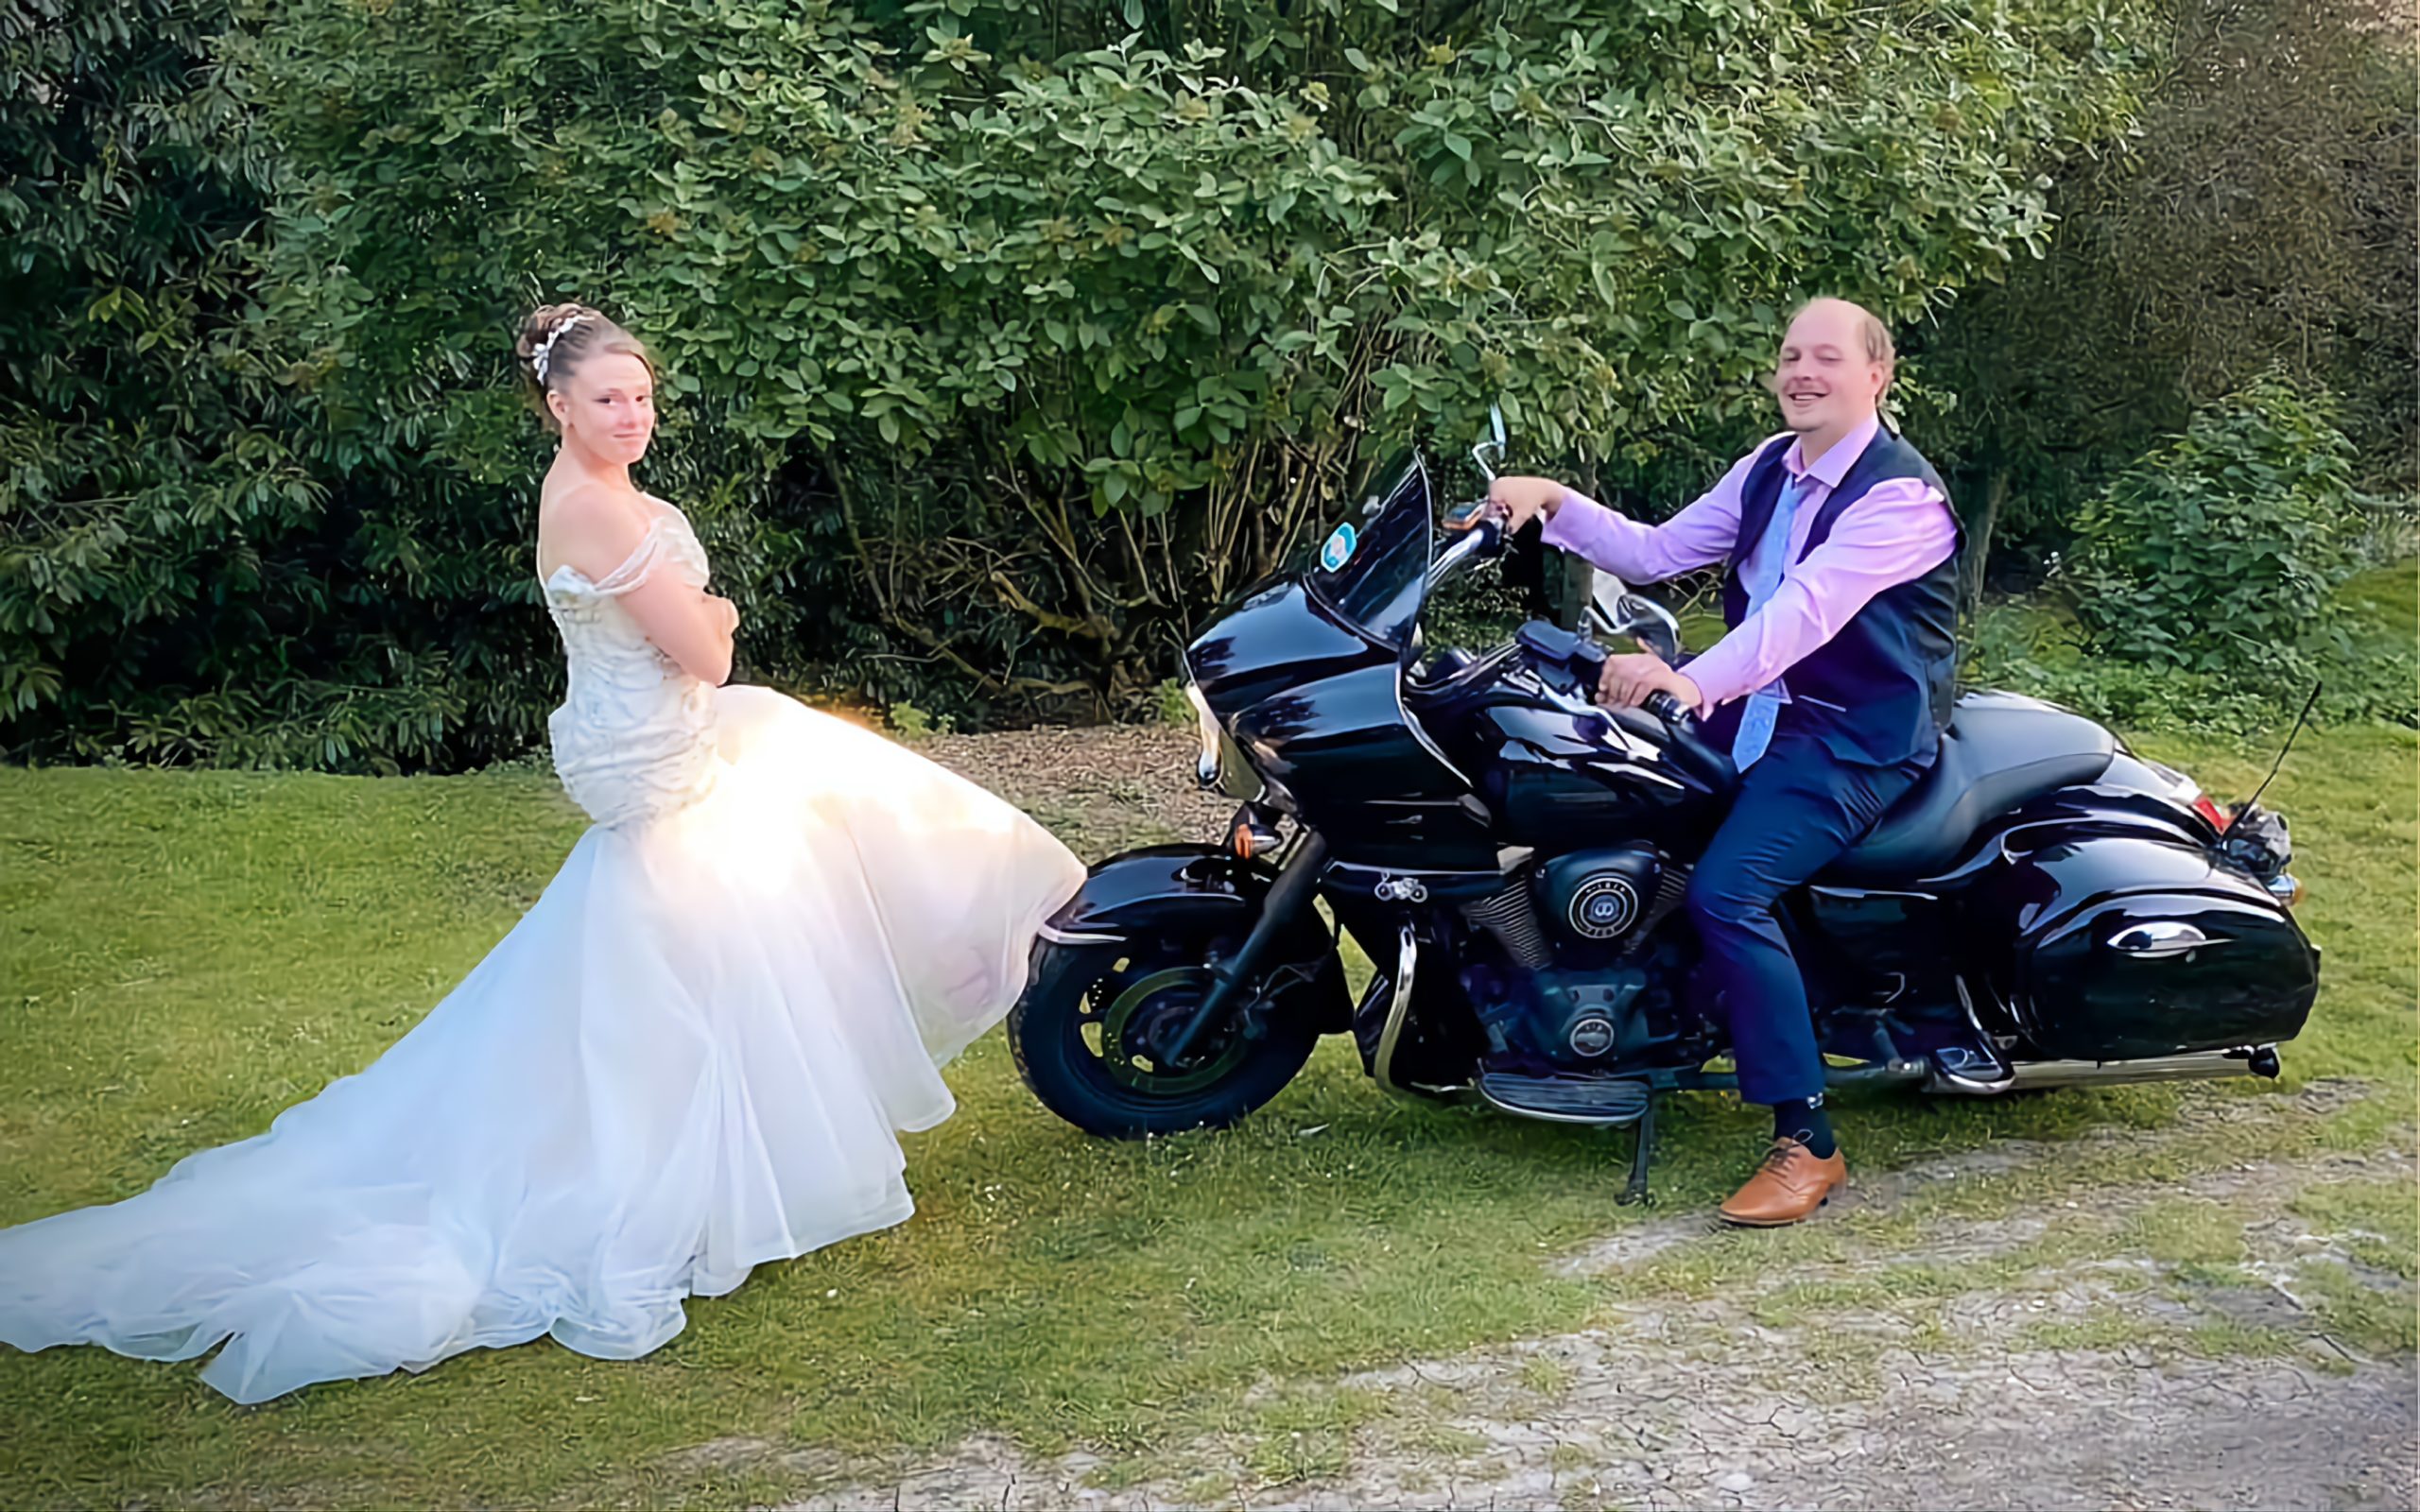 A bride and groom posing next to and on a motorbike